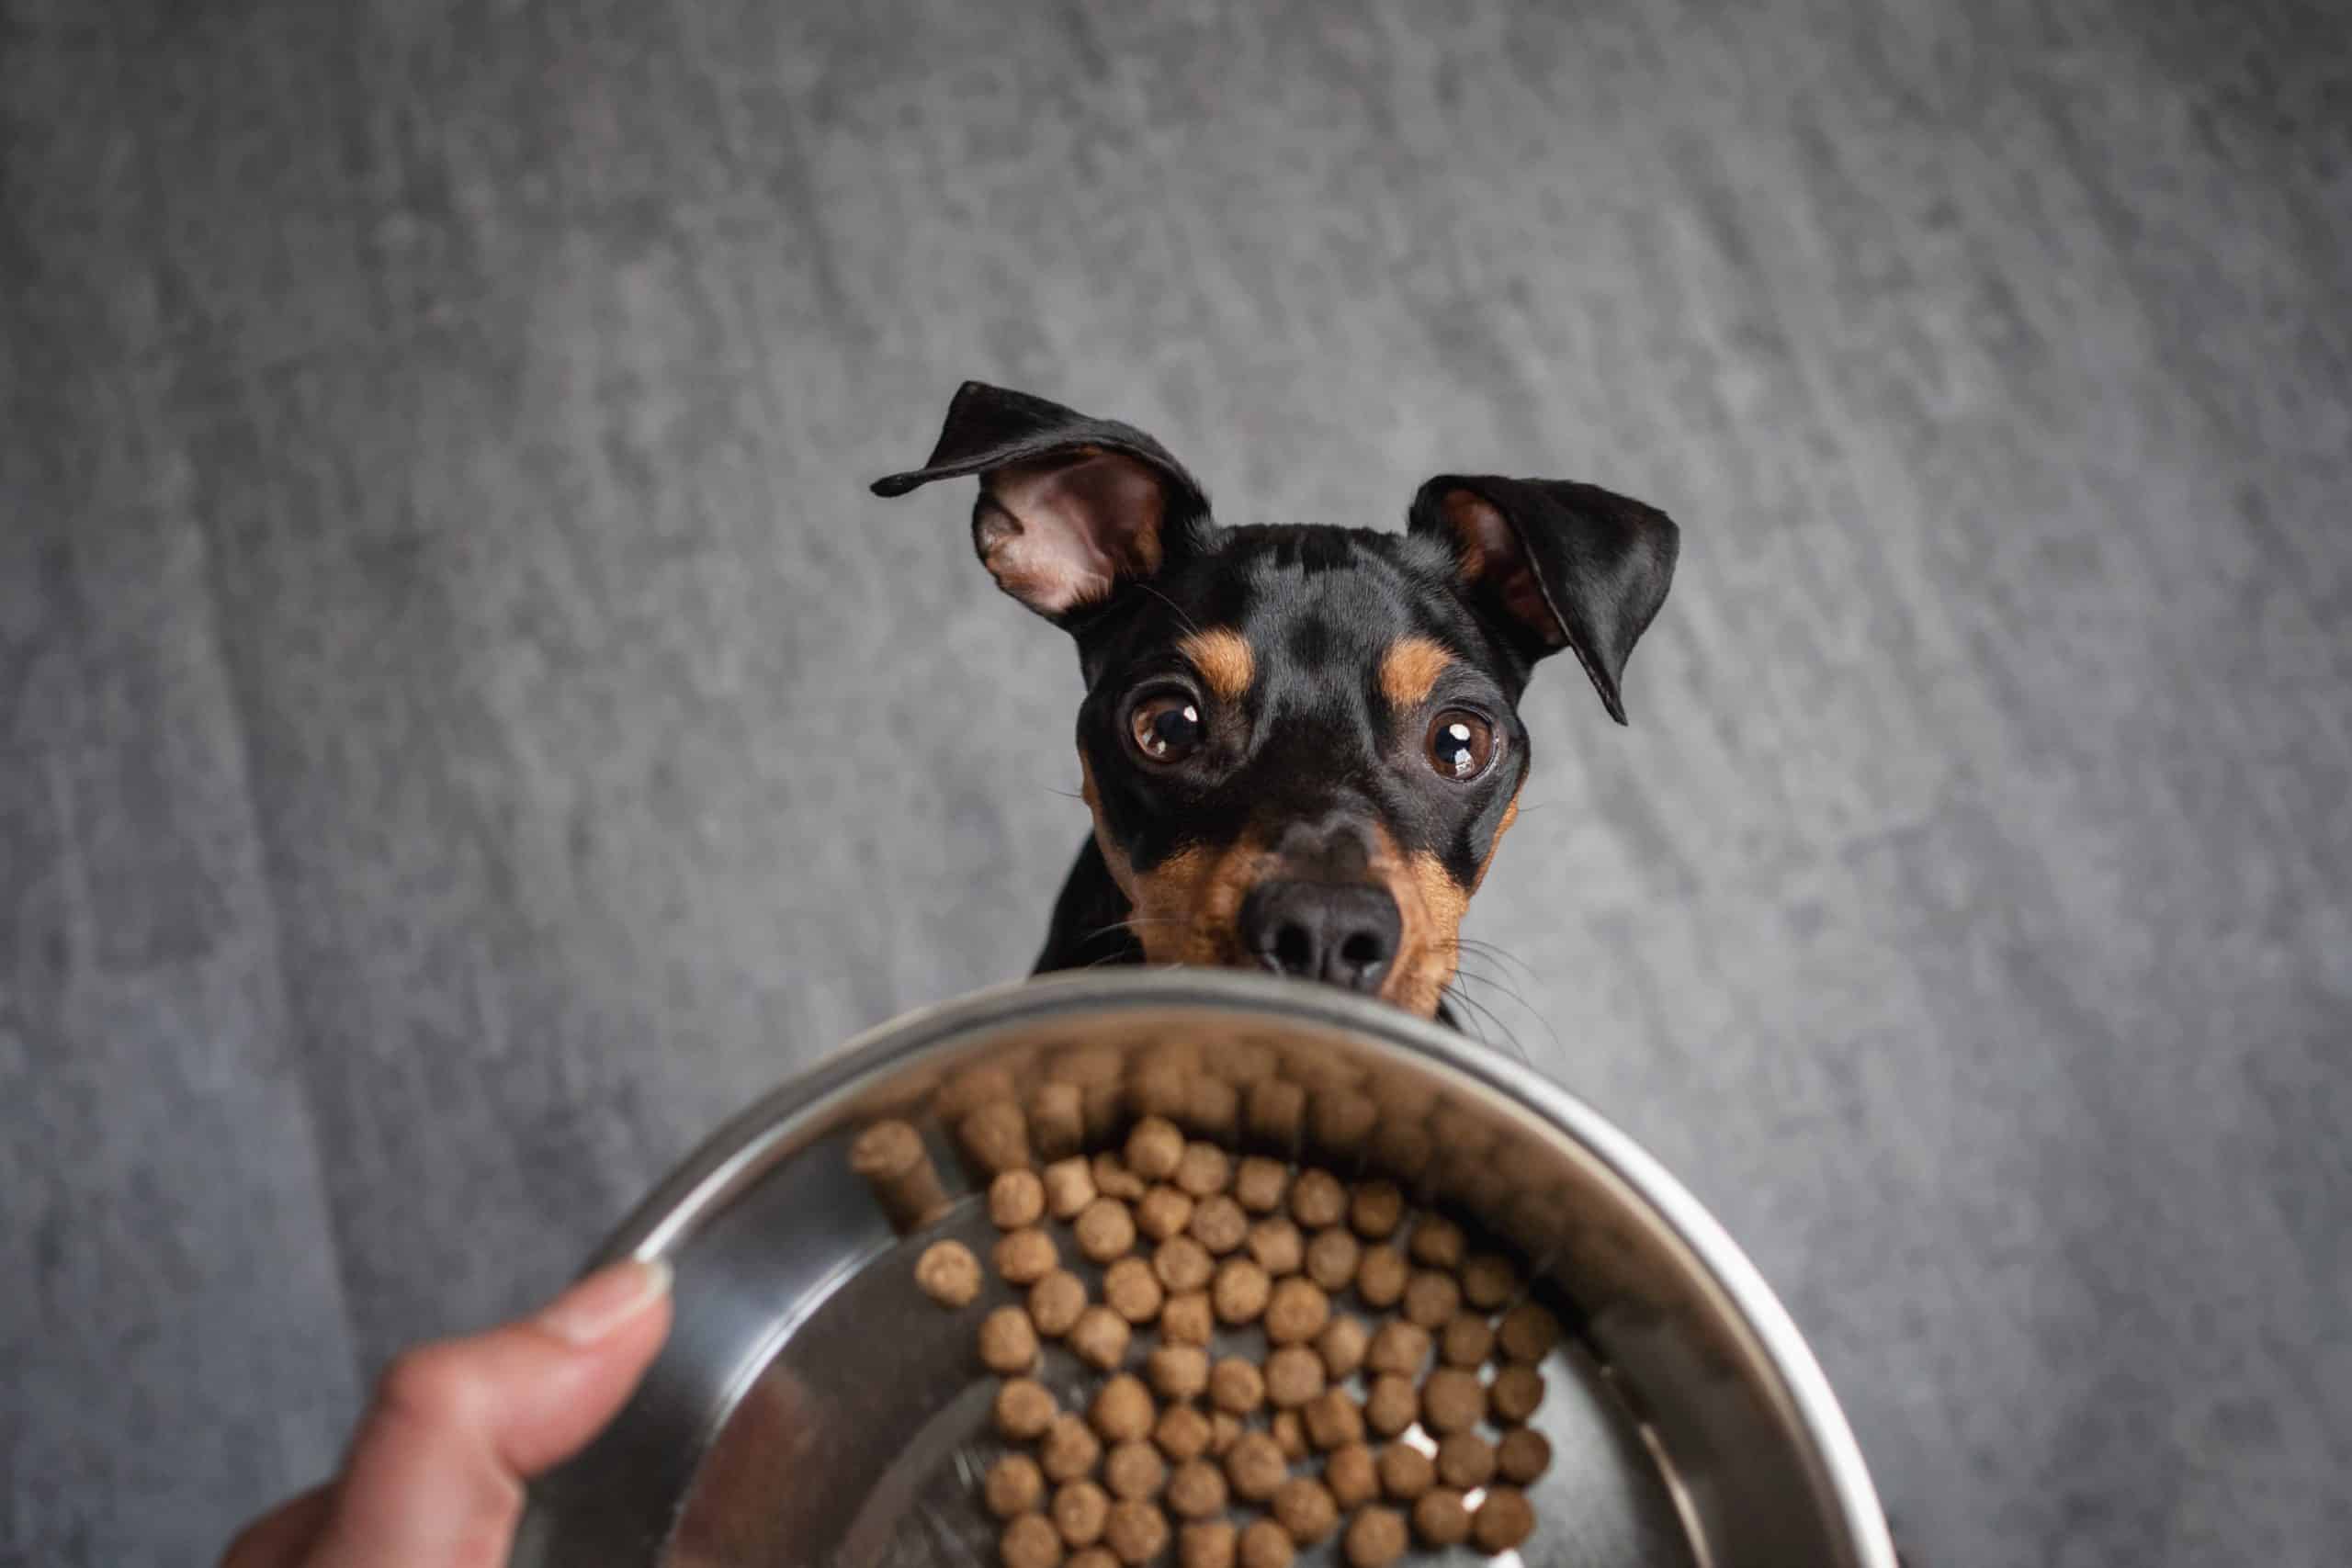 Owner gives miniature pinscher small-bite dog food.